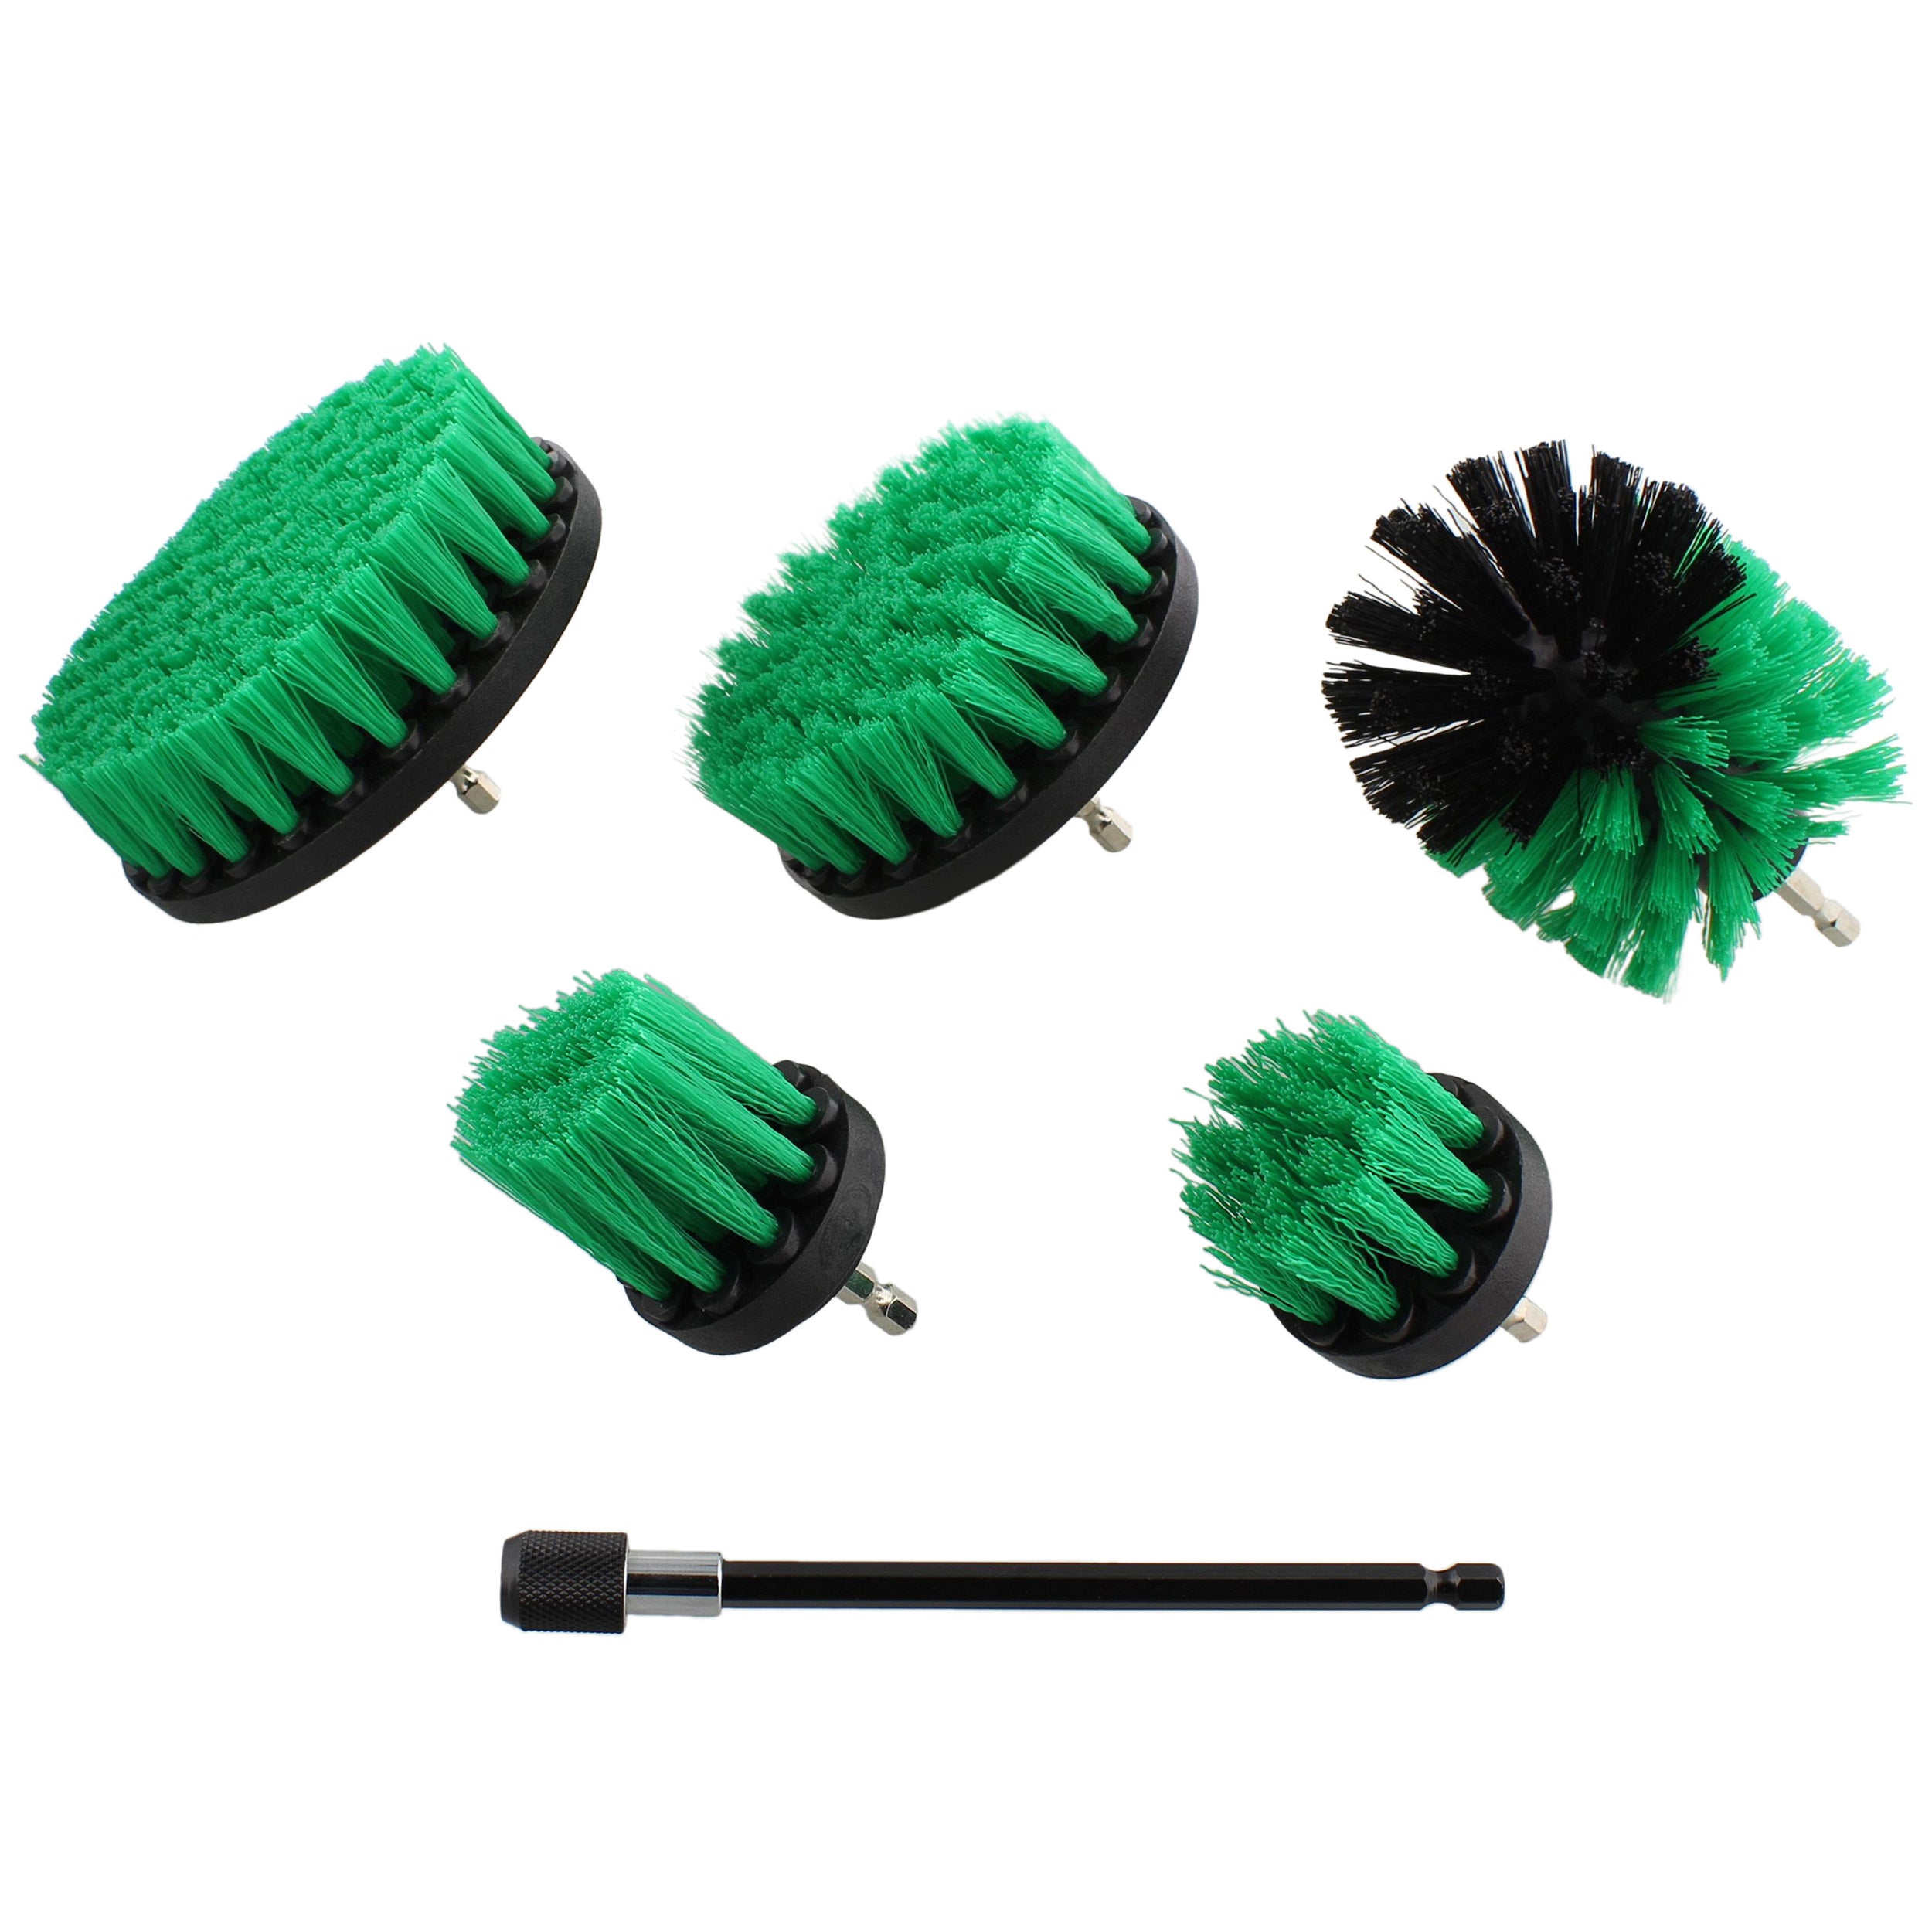 5pc Green Medium Bristle Scrubber Drill Brush 1/4in Dr with Extension